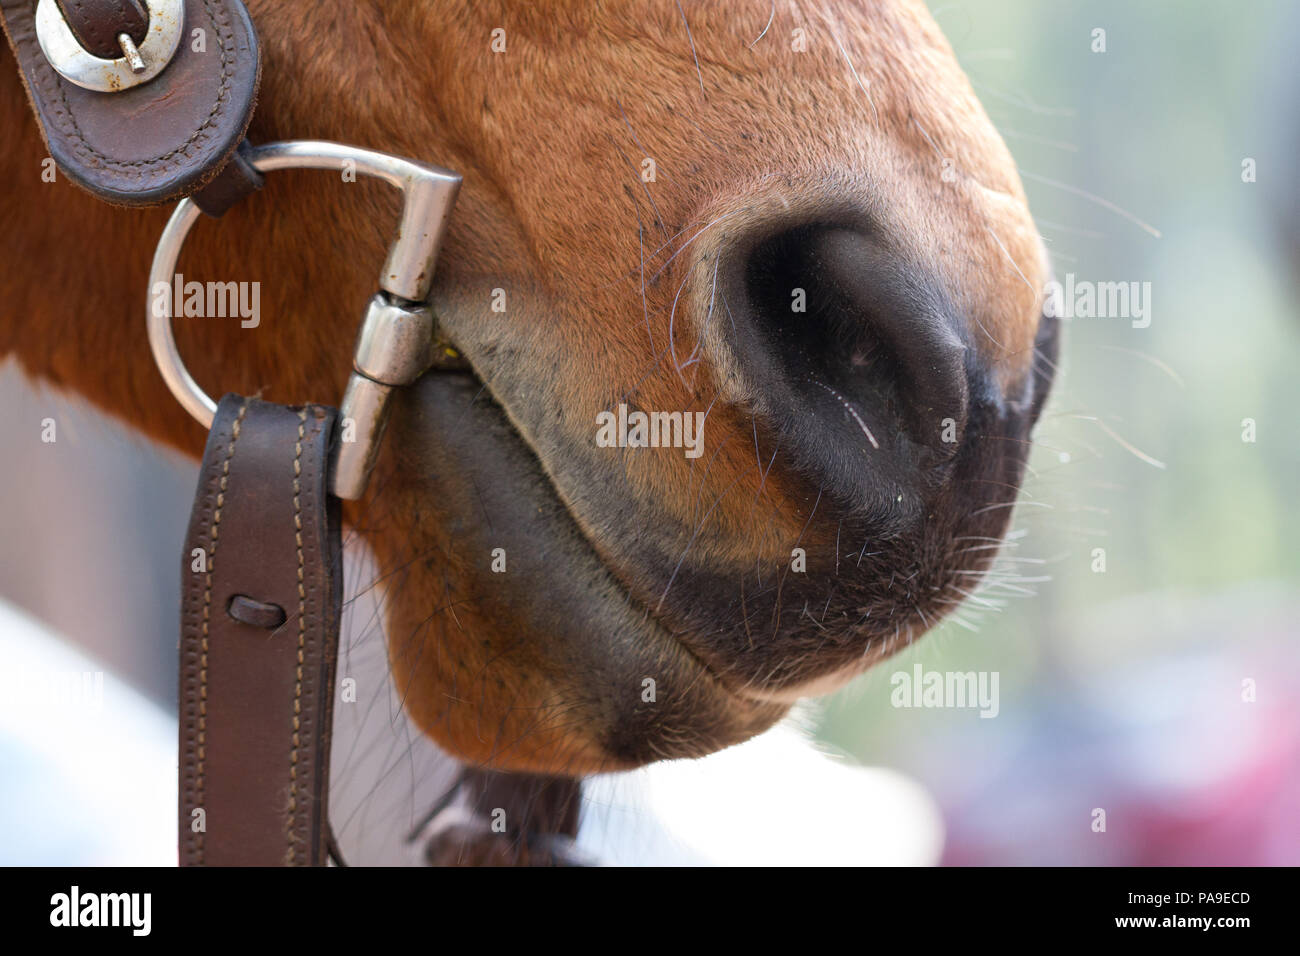 Closeup of horse nose with nostril, mouth and bit Stock Photo